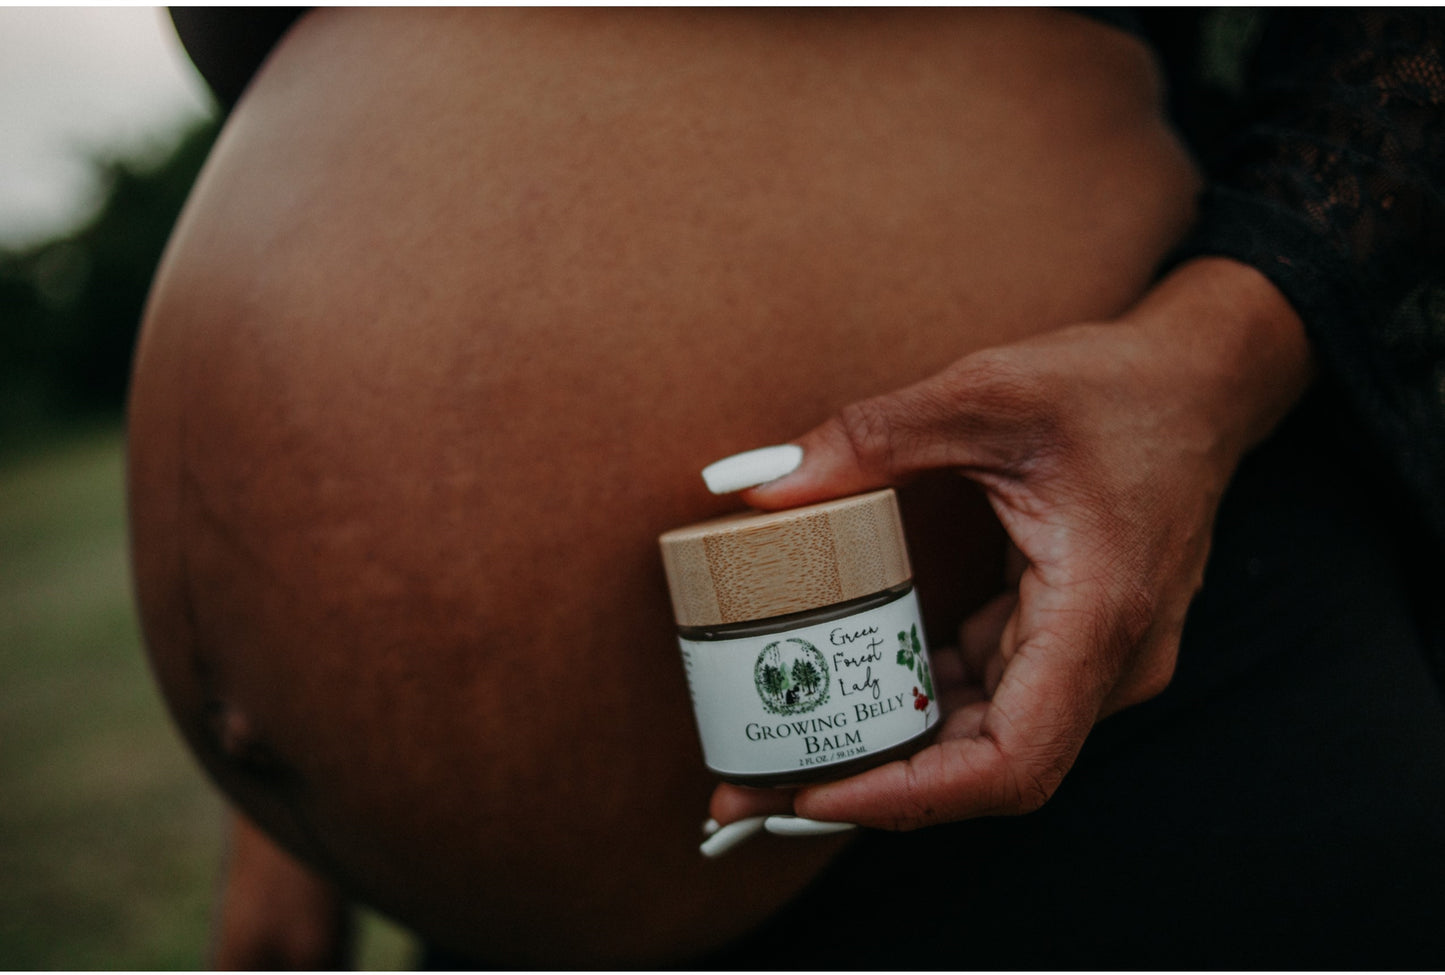 Woman with a large growing pregnant belly holding a jar of Growing Belly Balm